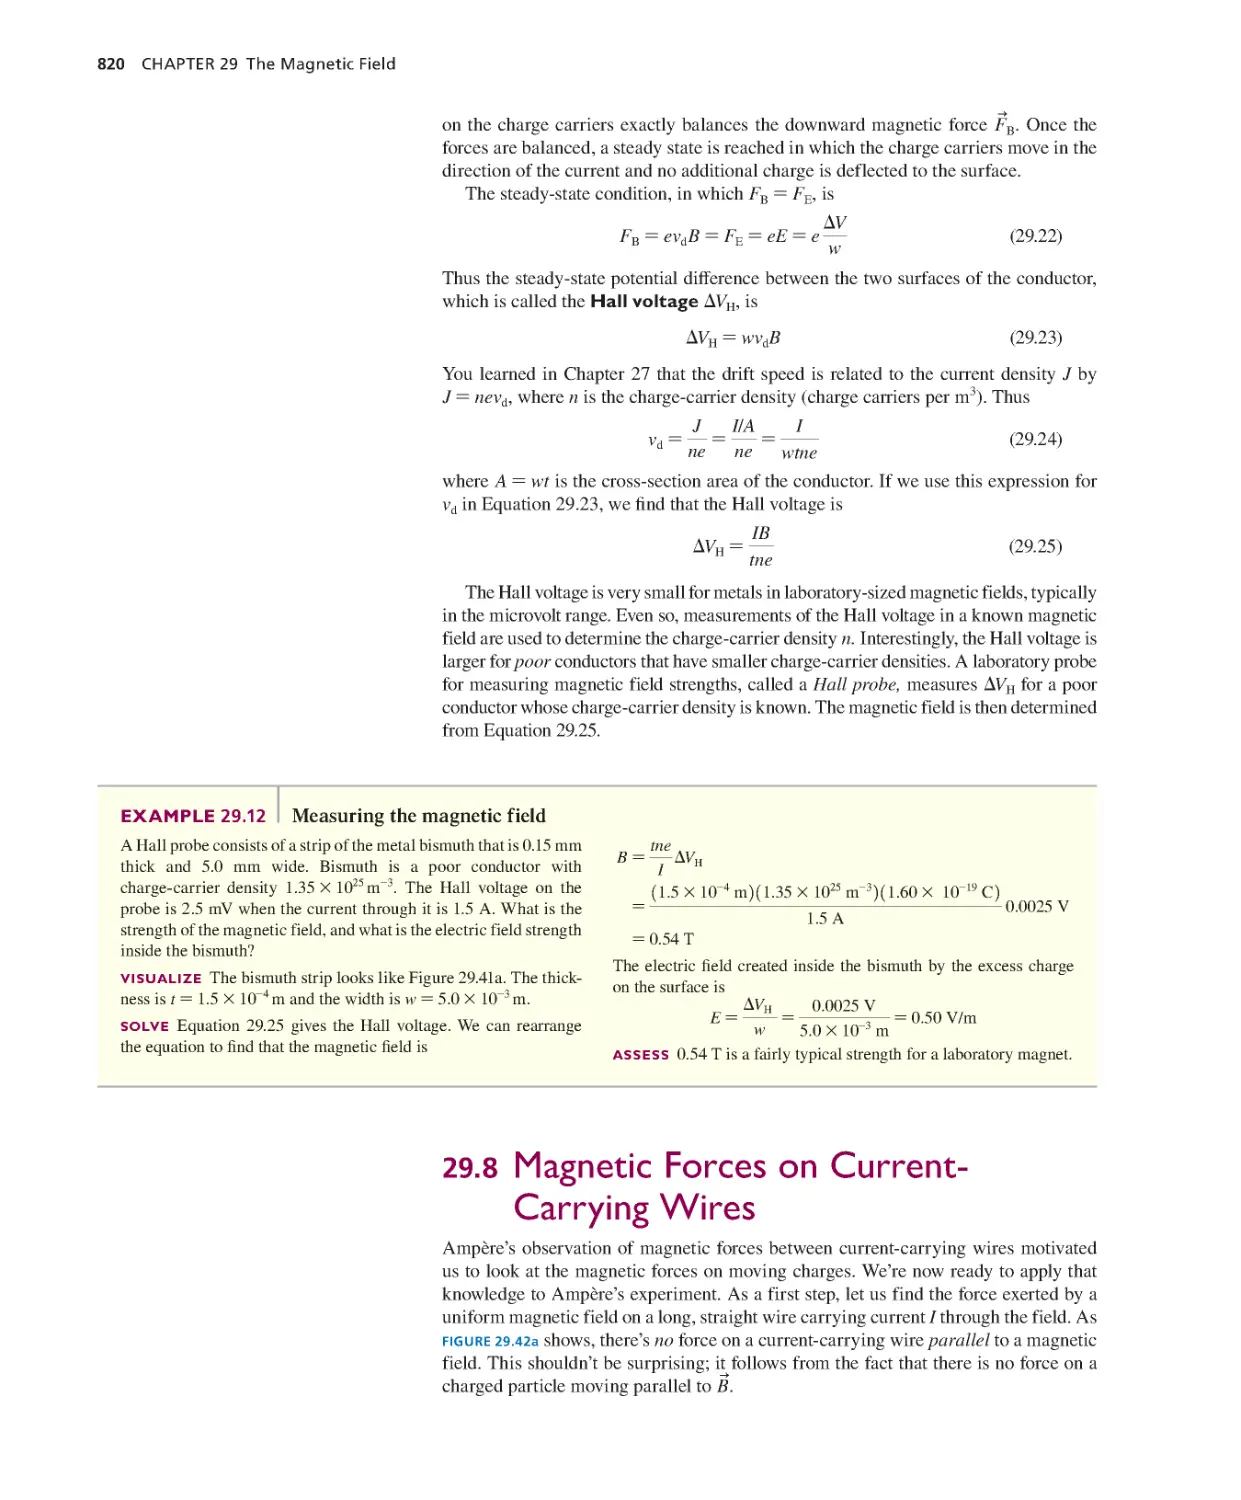 29.8. Magnetic Forces on Current-Carrying Wires